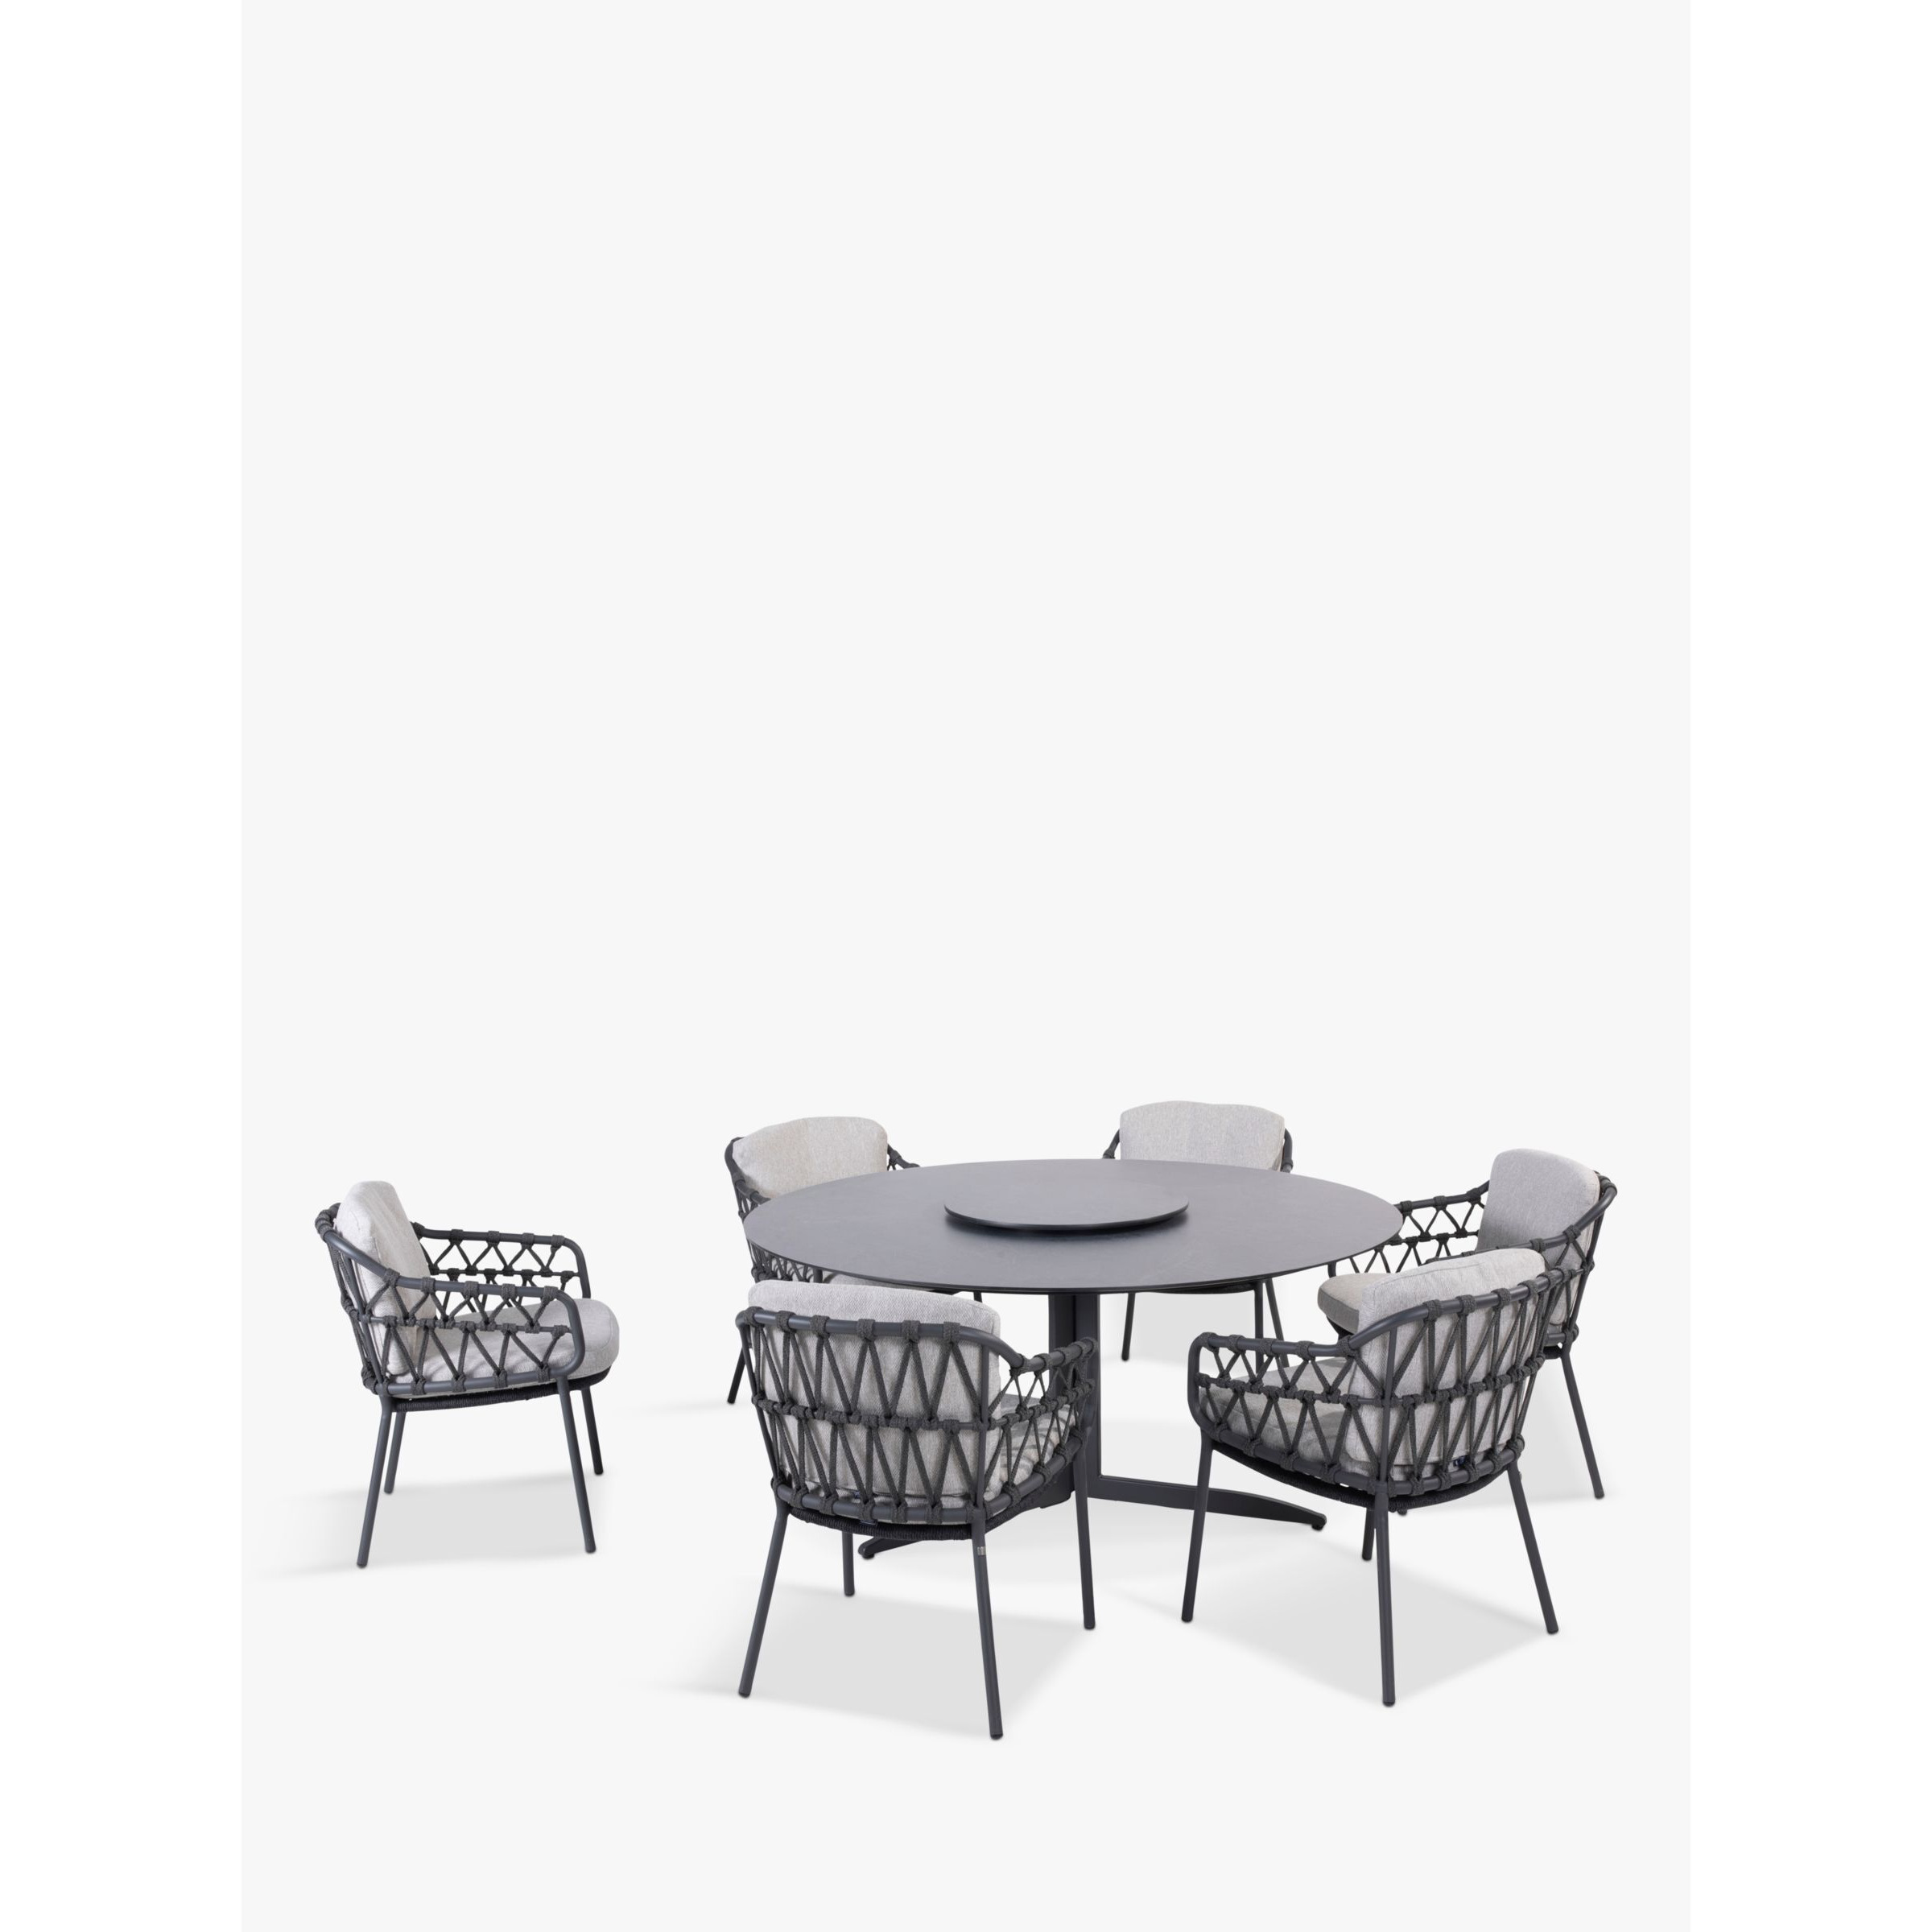 4 Seasons Outdoor Calpi & Embrace 6-Seater Garden Dining Set with Lazy Susan, Anthracite - image 1